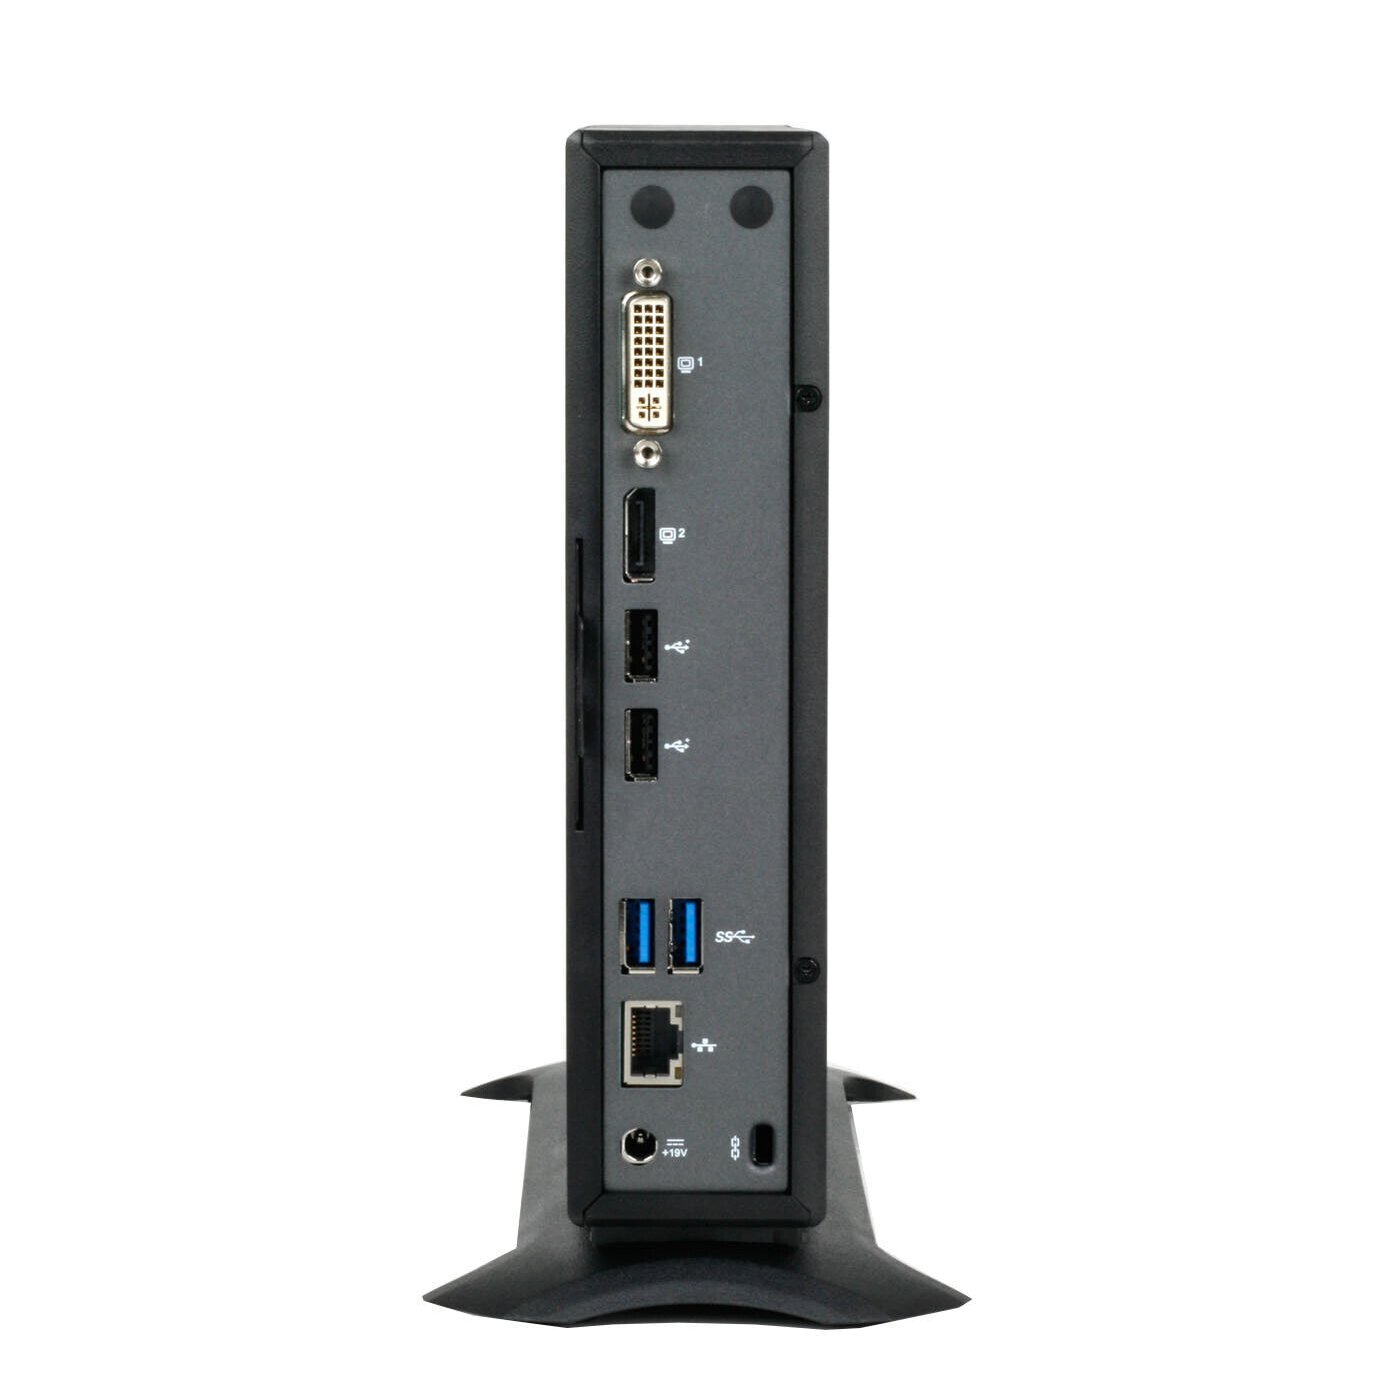 Dell Wyse thin client rear view